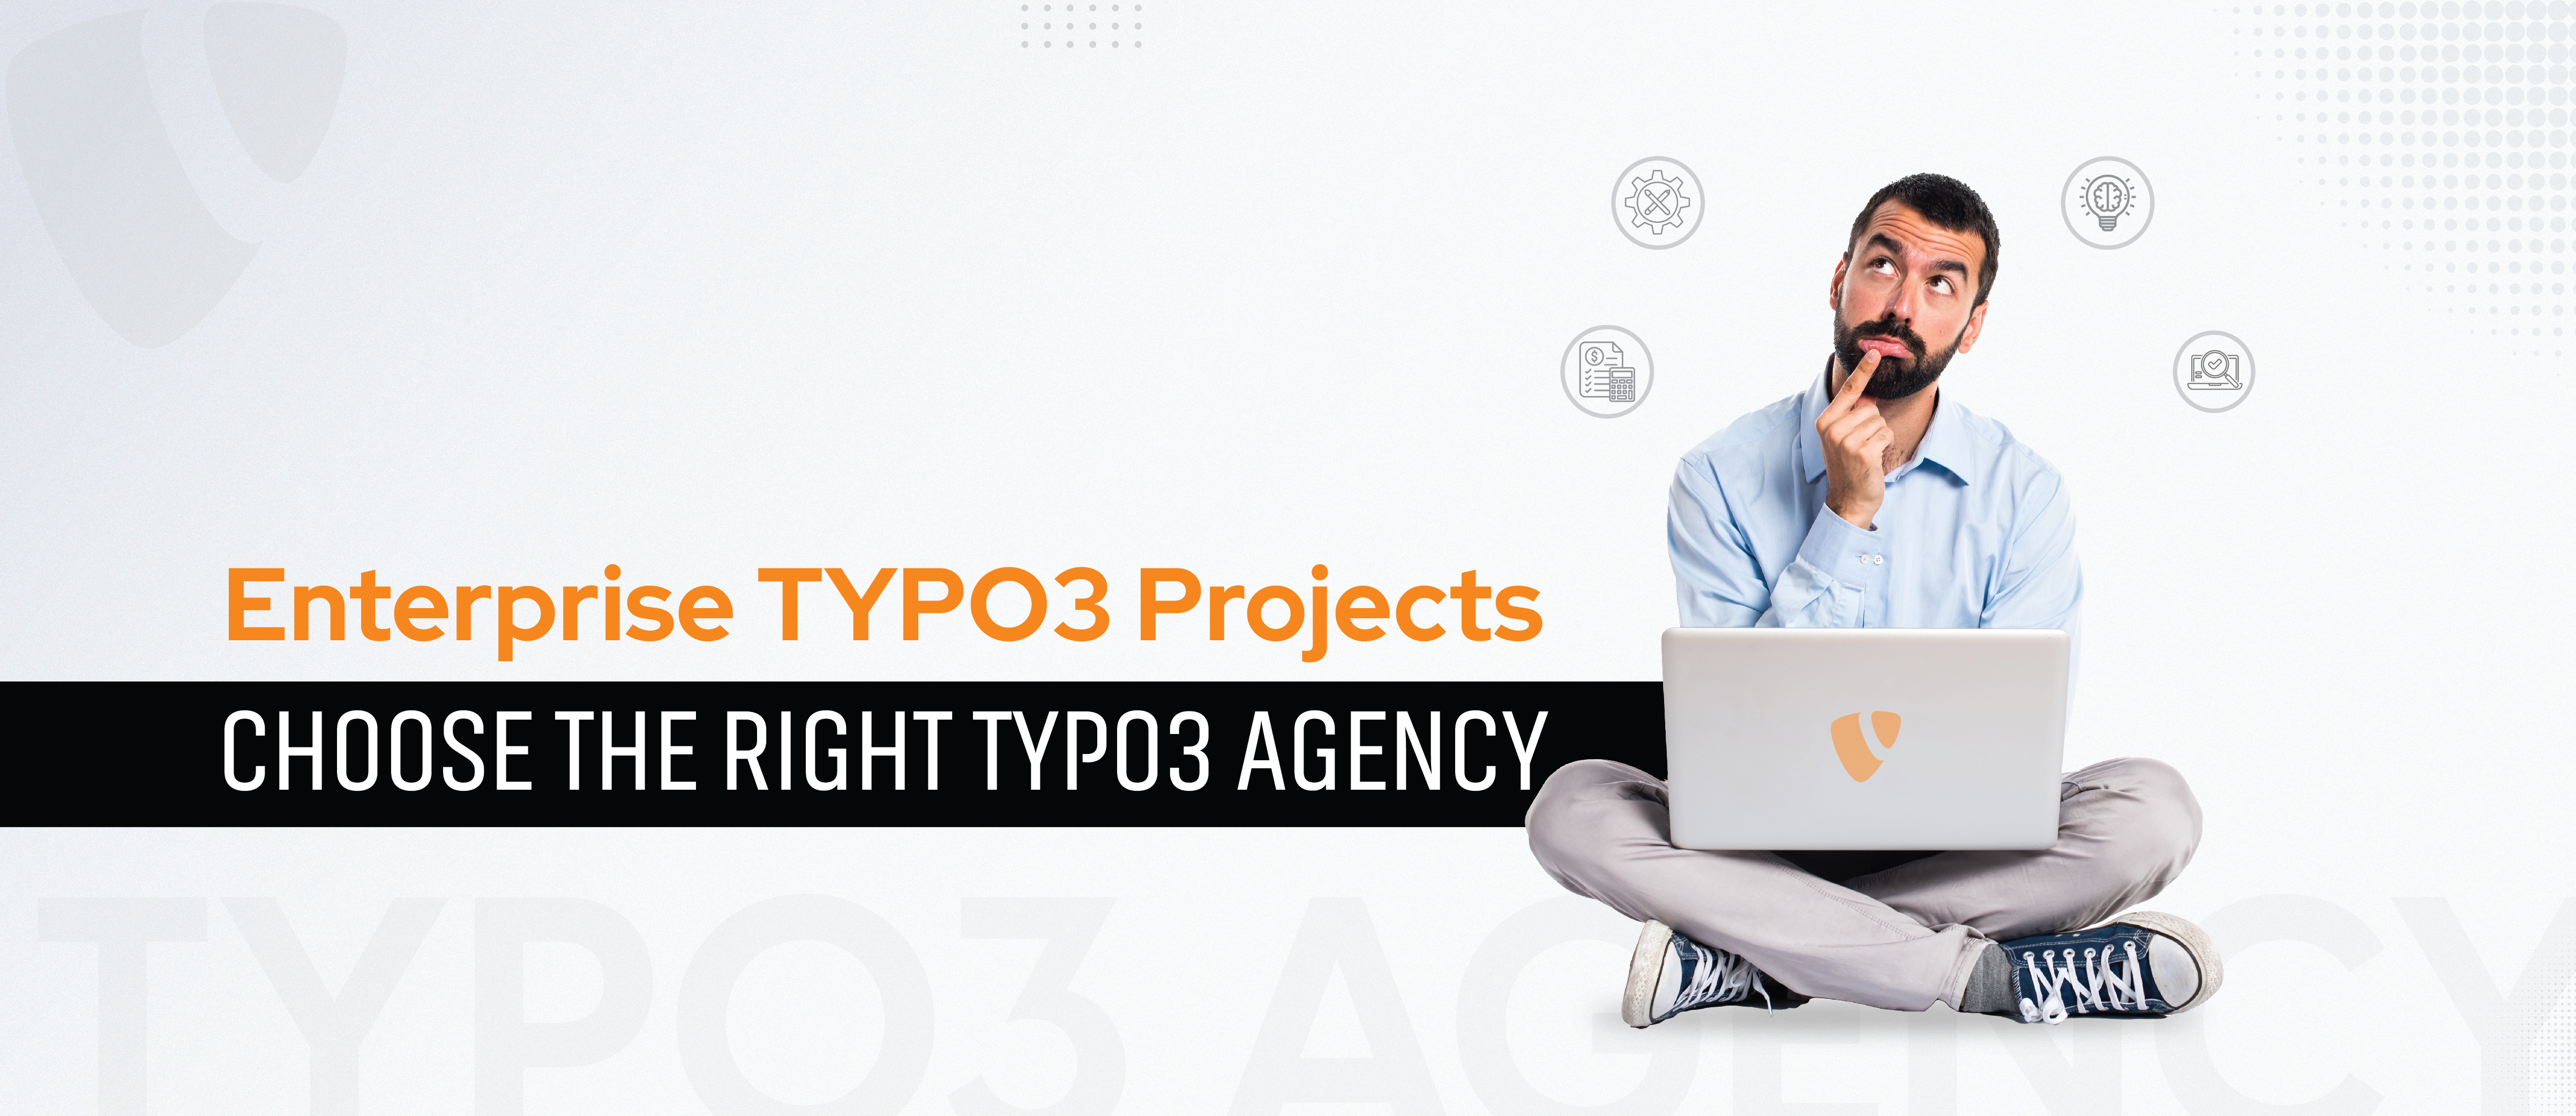 Enterprise TYPO3 Projects: Choose the Right TYPO3 Agency